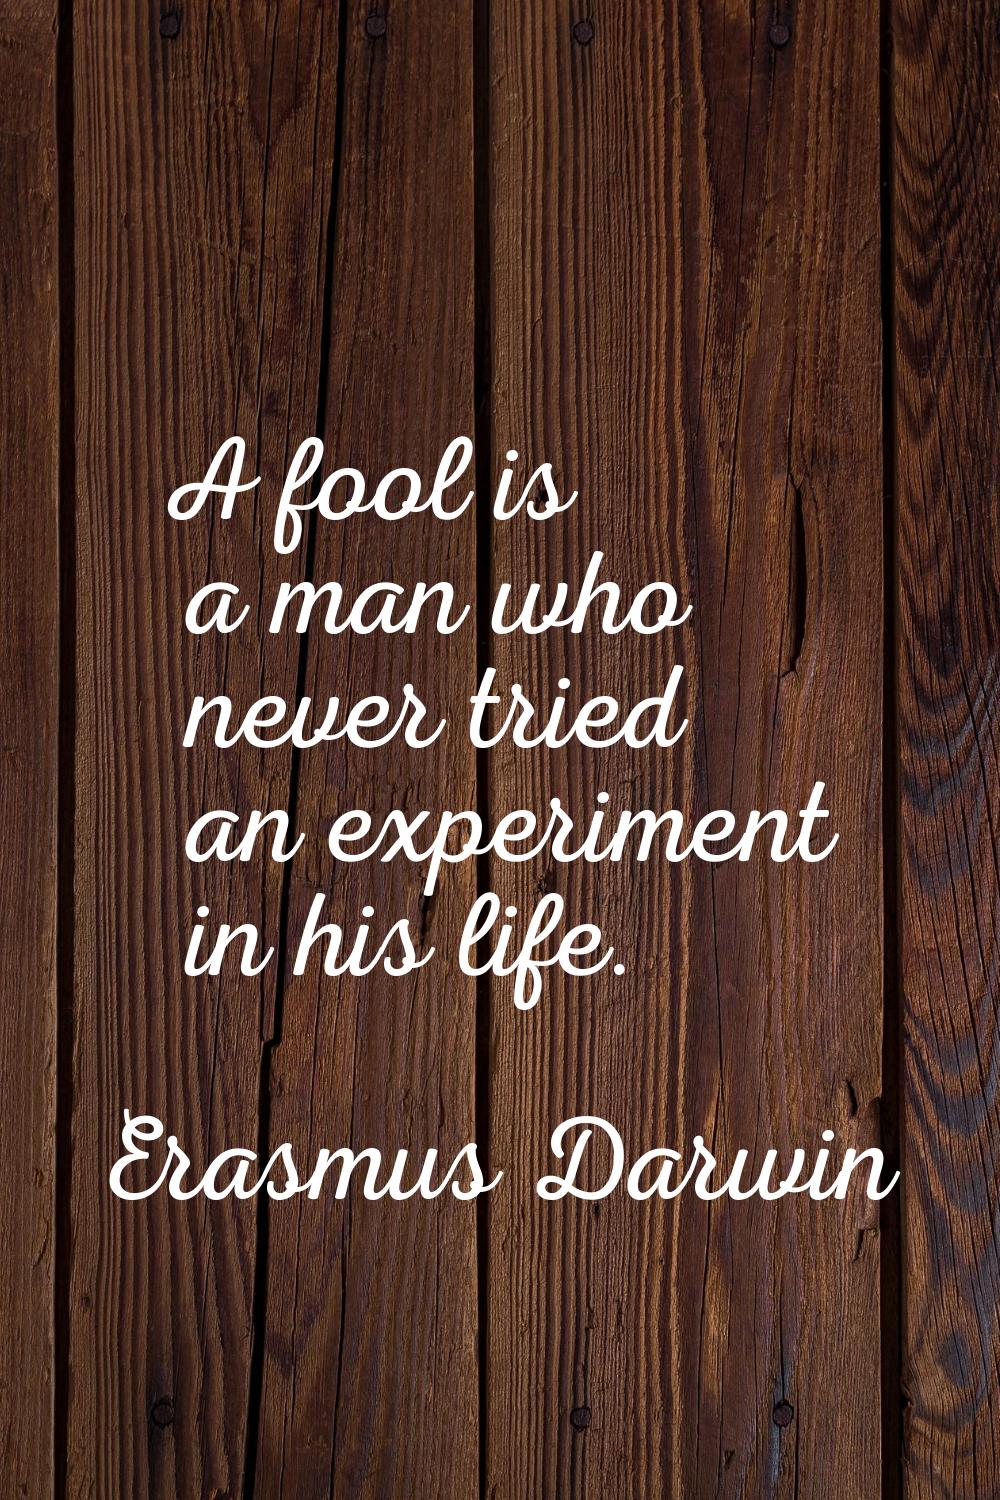 A fool is a man who never tried an experiment in his life.